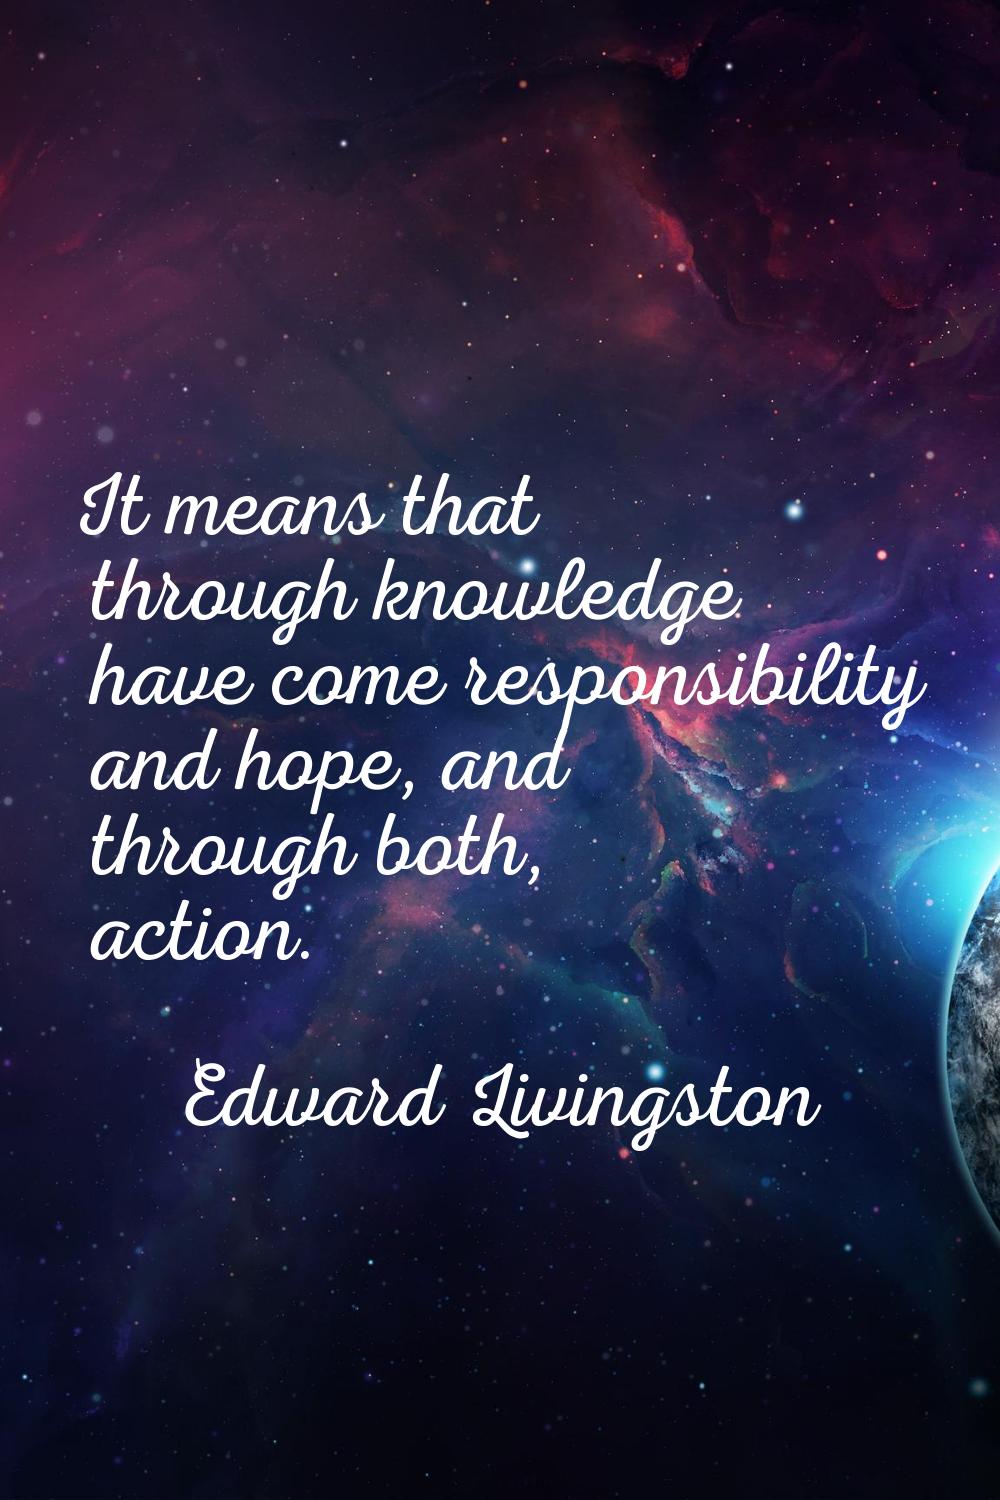 It means that through knowledge have come responsibility and hope, and through both, action.